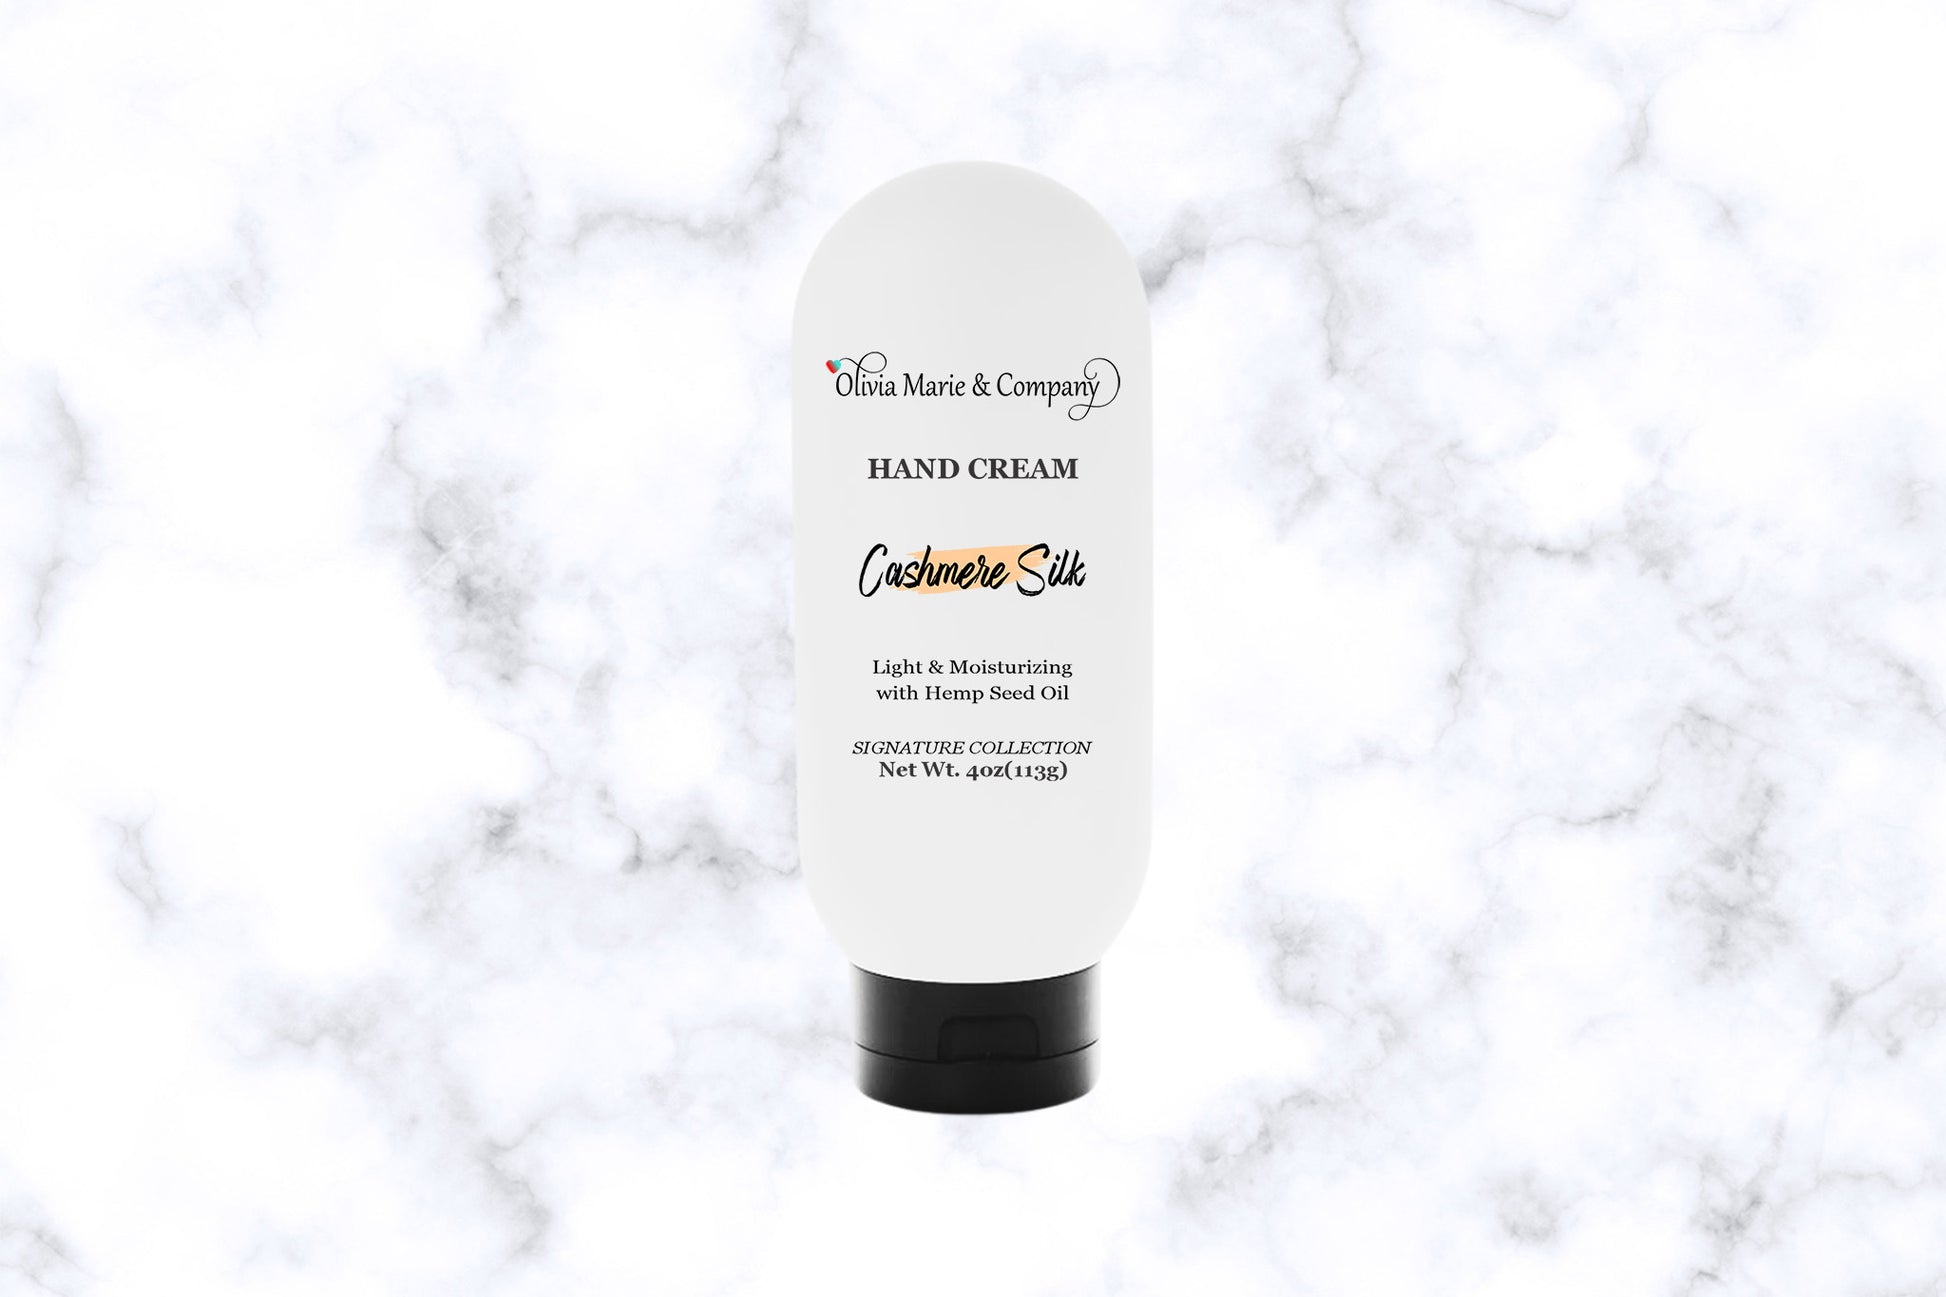 Cashmere silk hand cream in a white squeeze tube with a black cap.